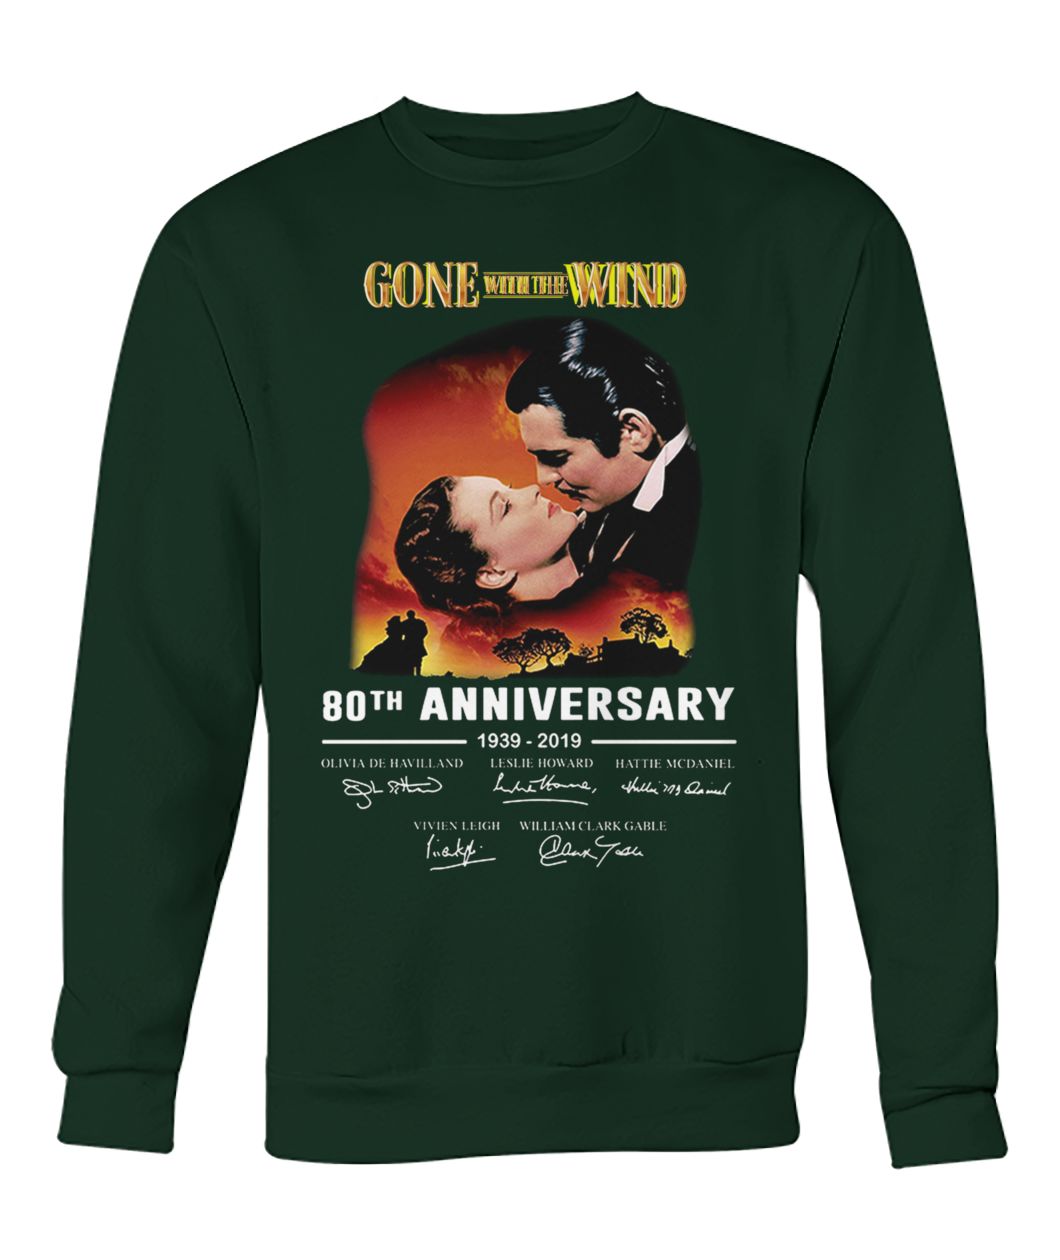 Gone with the wind 80th anniversary 1939 2019 signatures crew neck sweatshirt